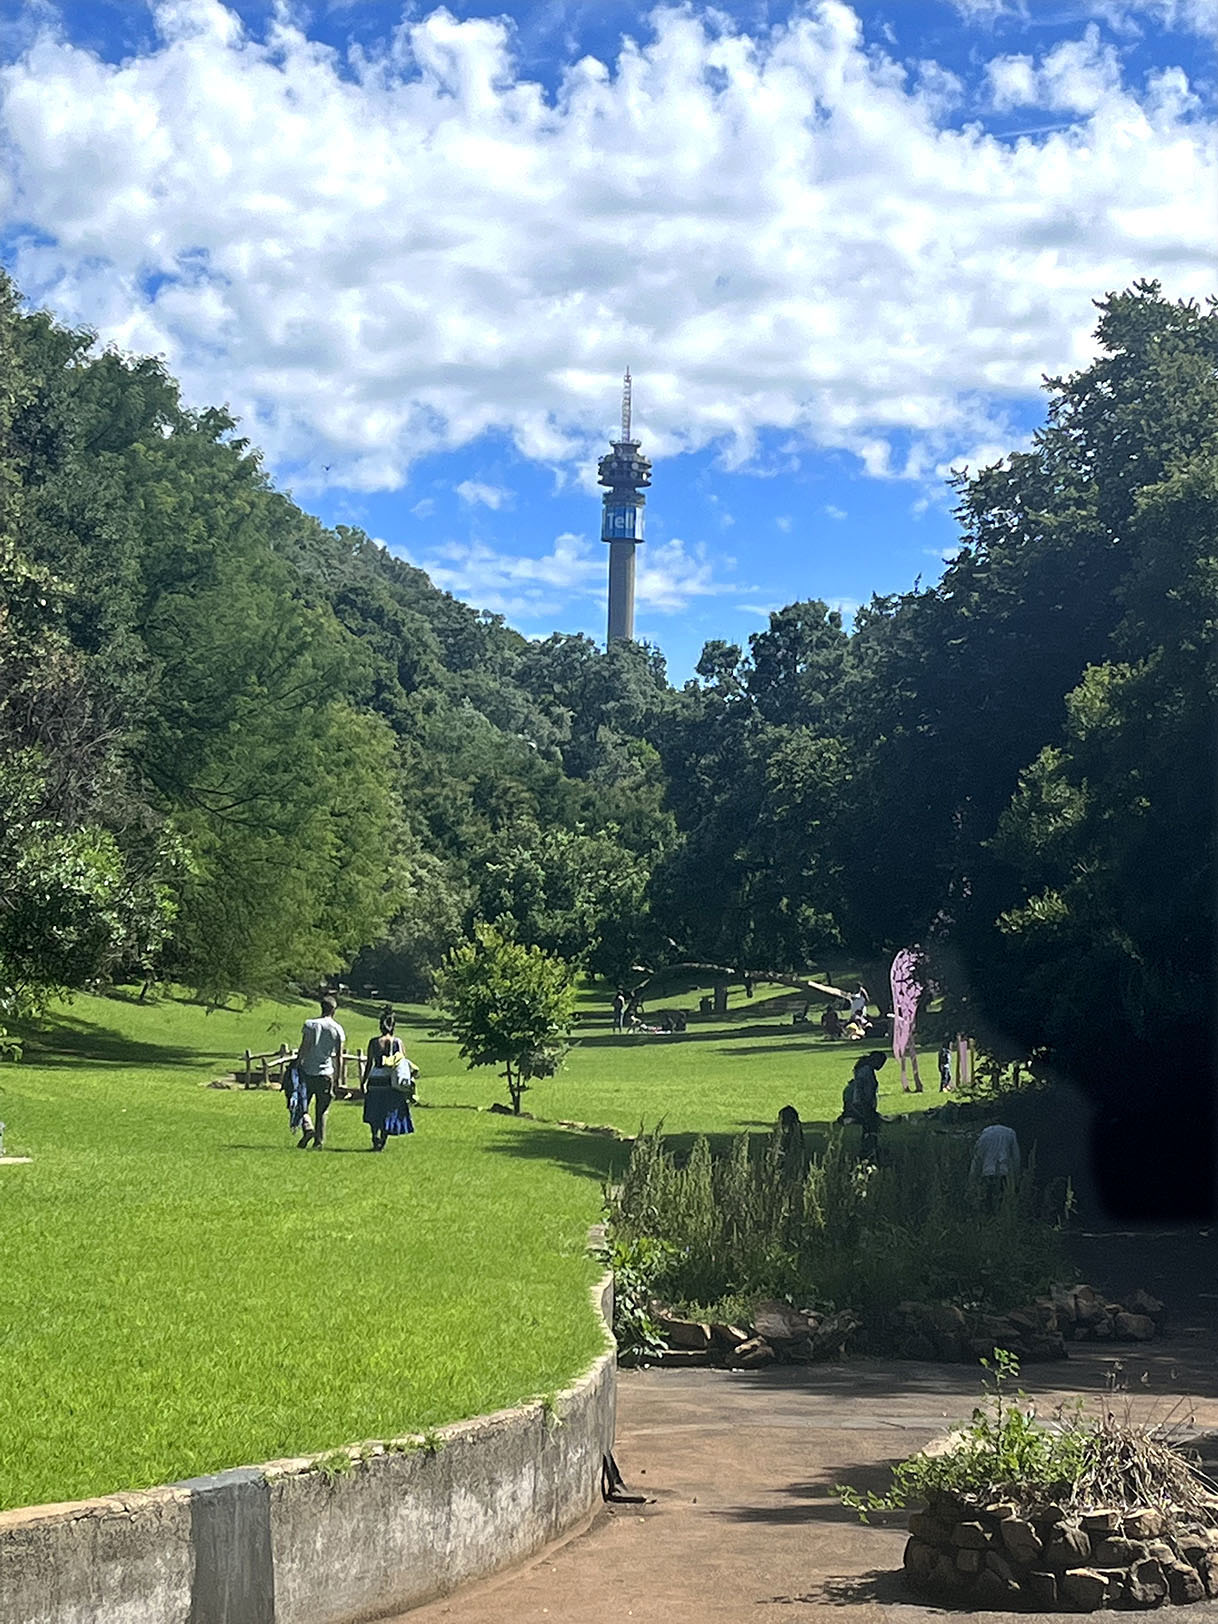 View of the Hillbrow Tower from the Giraffe Lawn, The Wilds, Johannesburg.